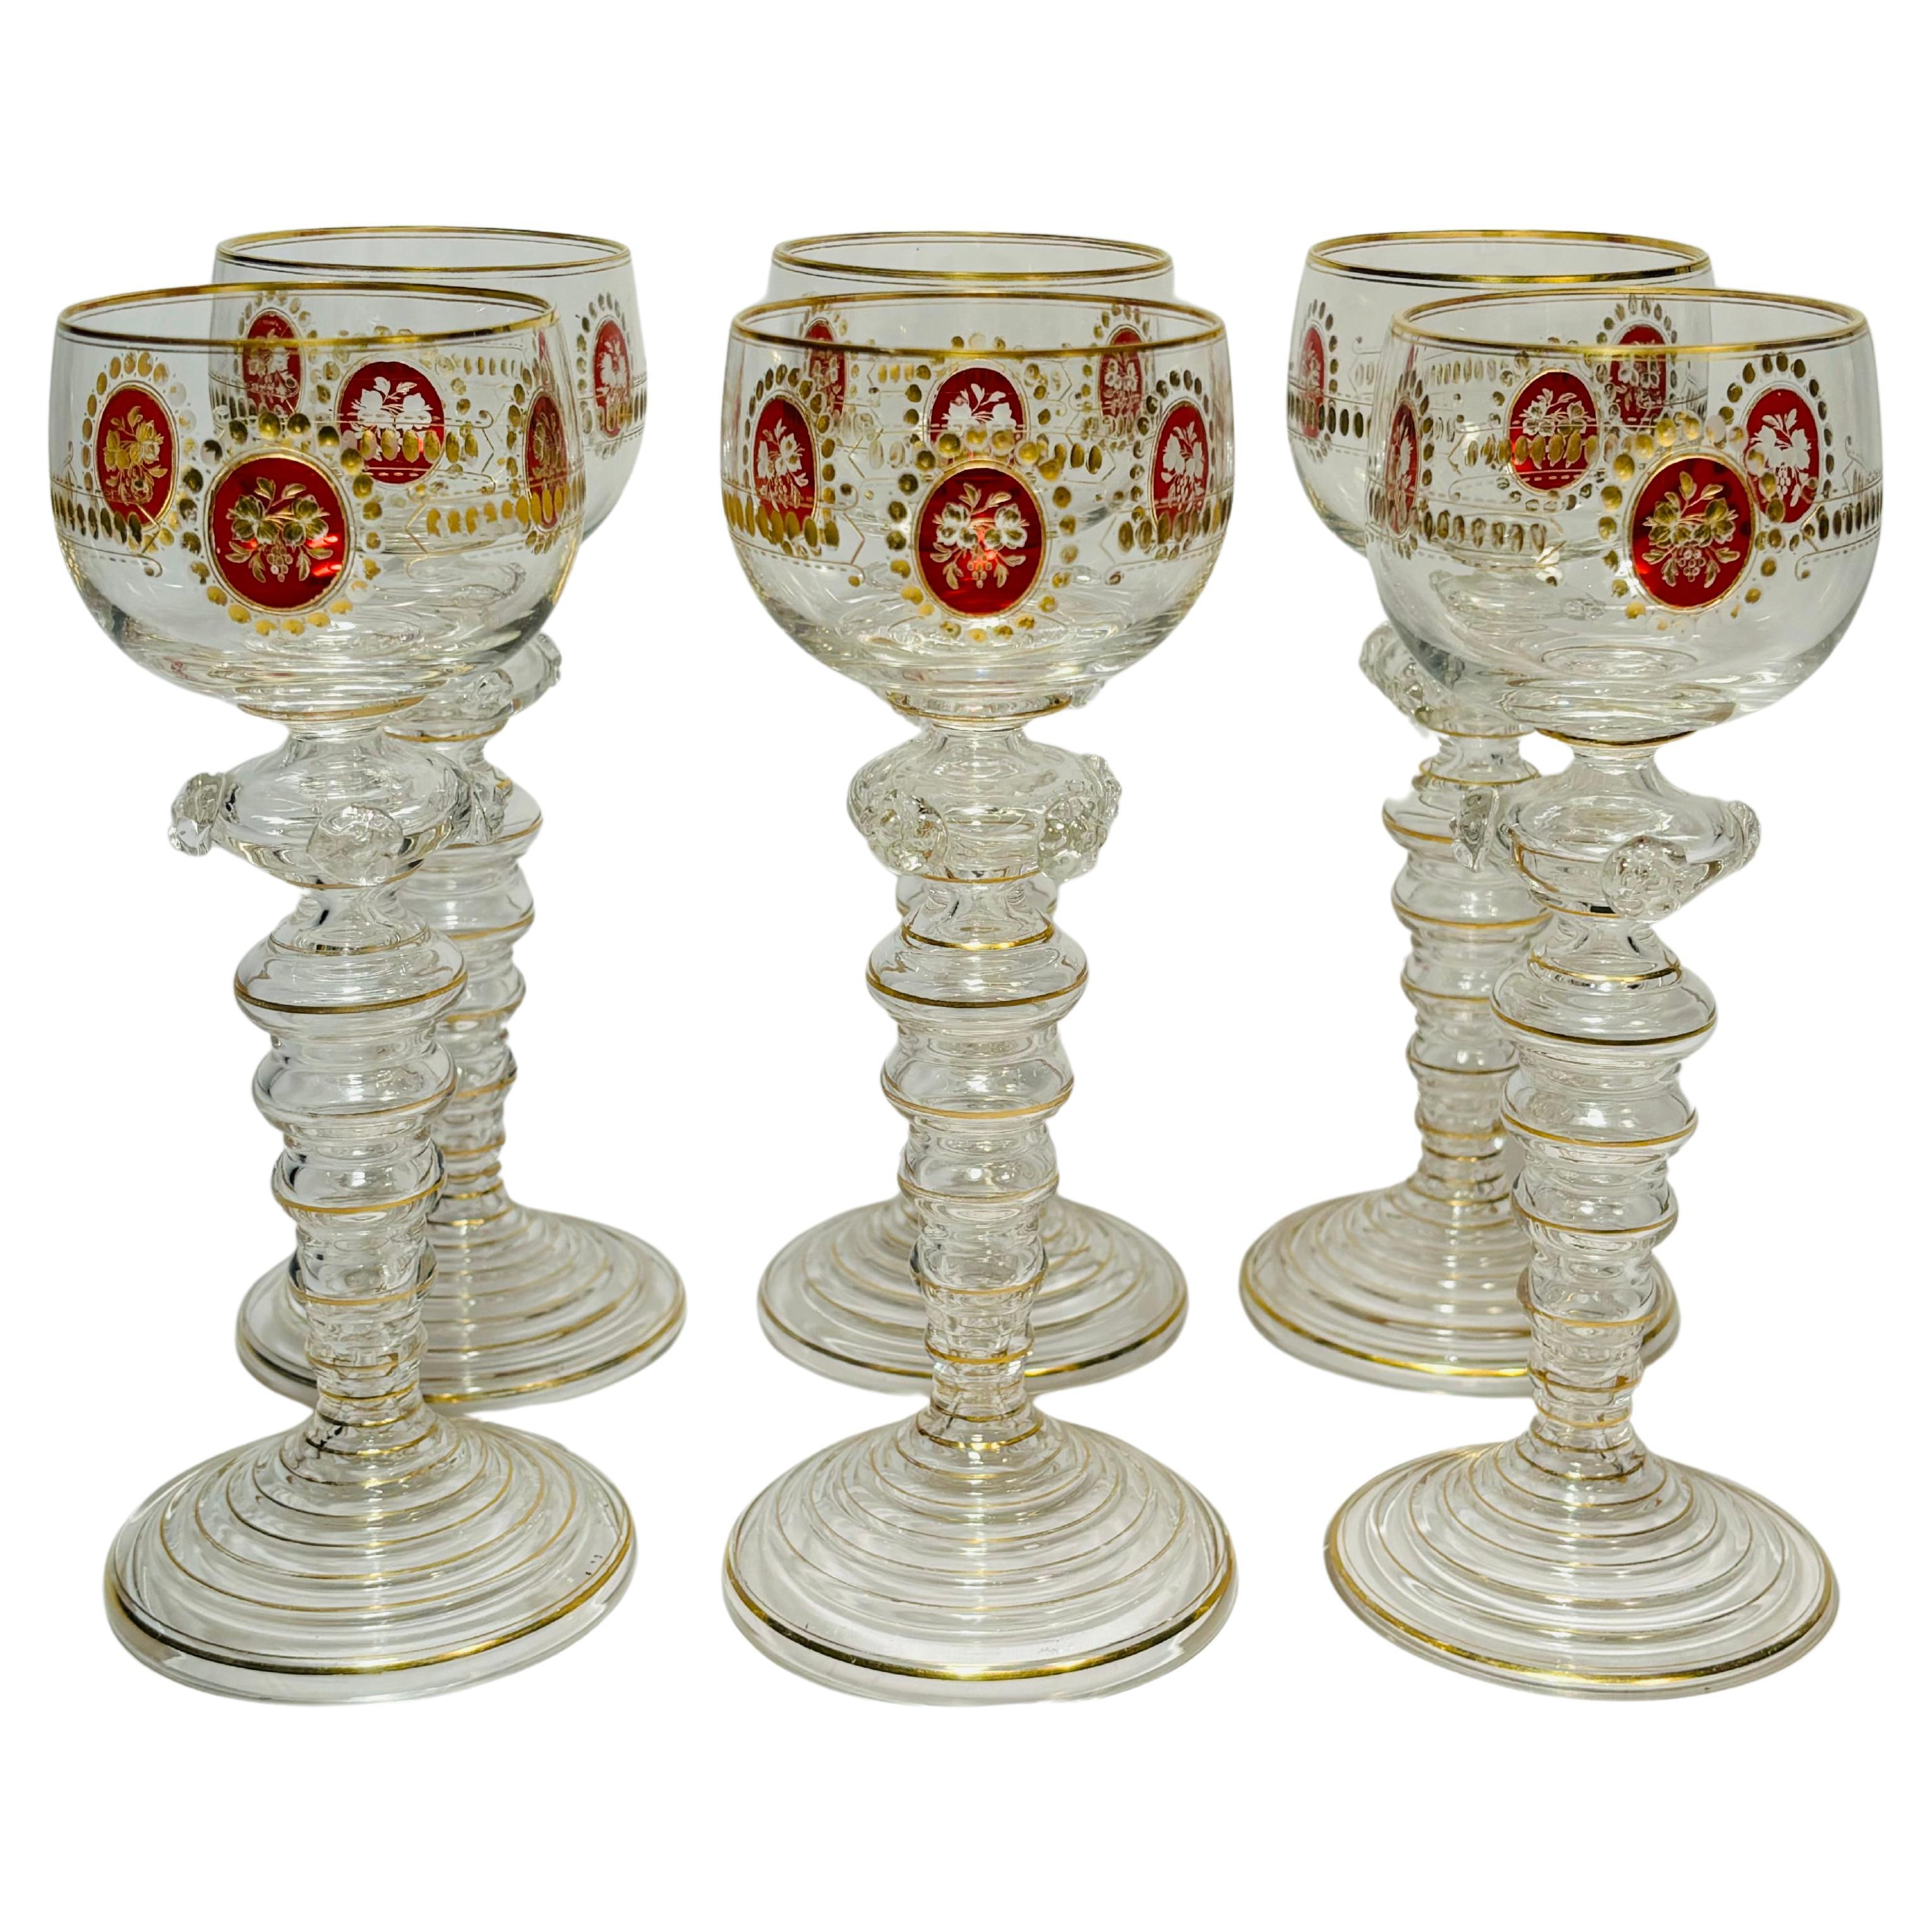 Set of 6 Antique Moser Wine Goblets, Ruby Cartouches With Gilding. Circa 1880